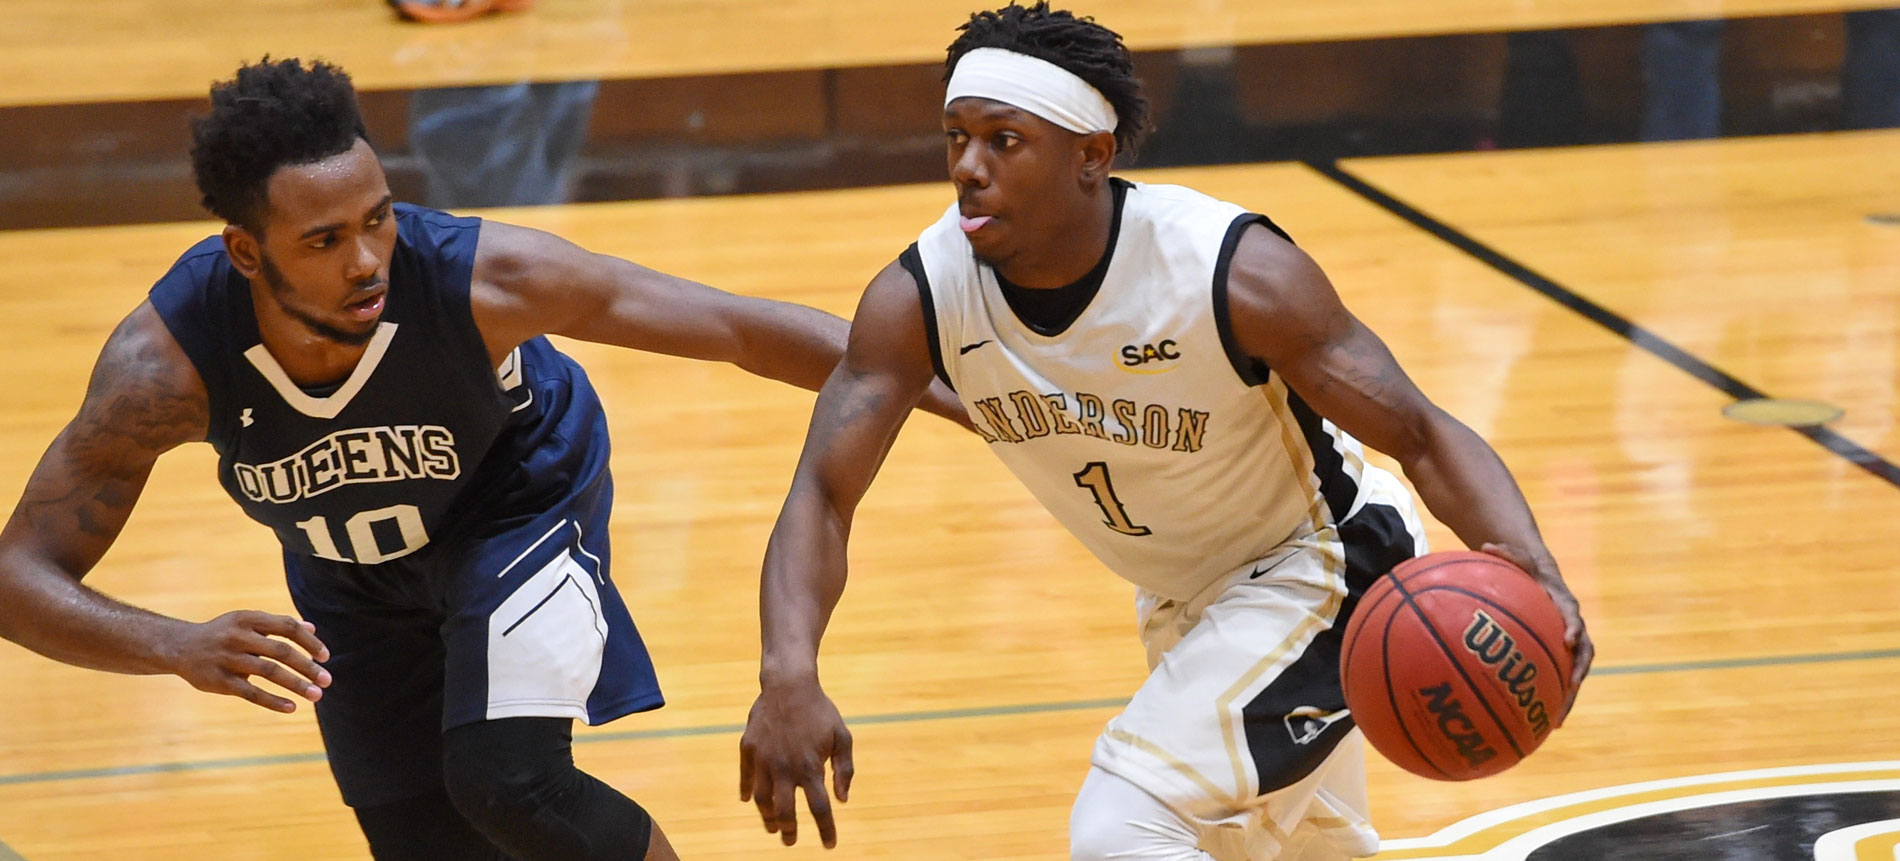 Second-Half Rally Falls Short as Carson-Newman Holds off Trojans